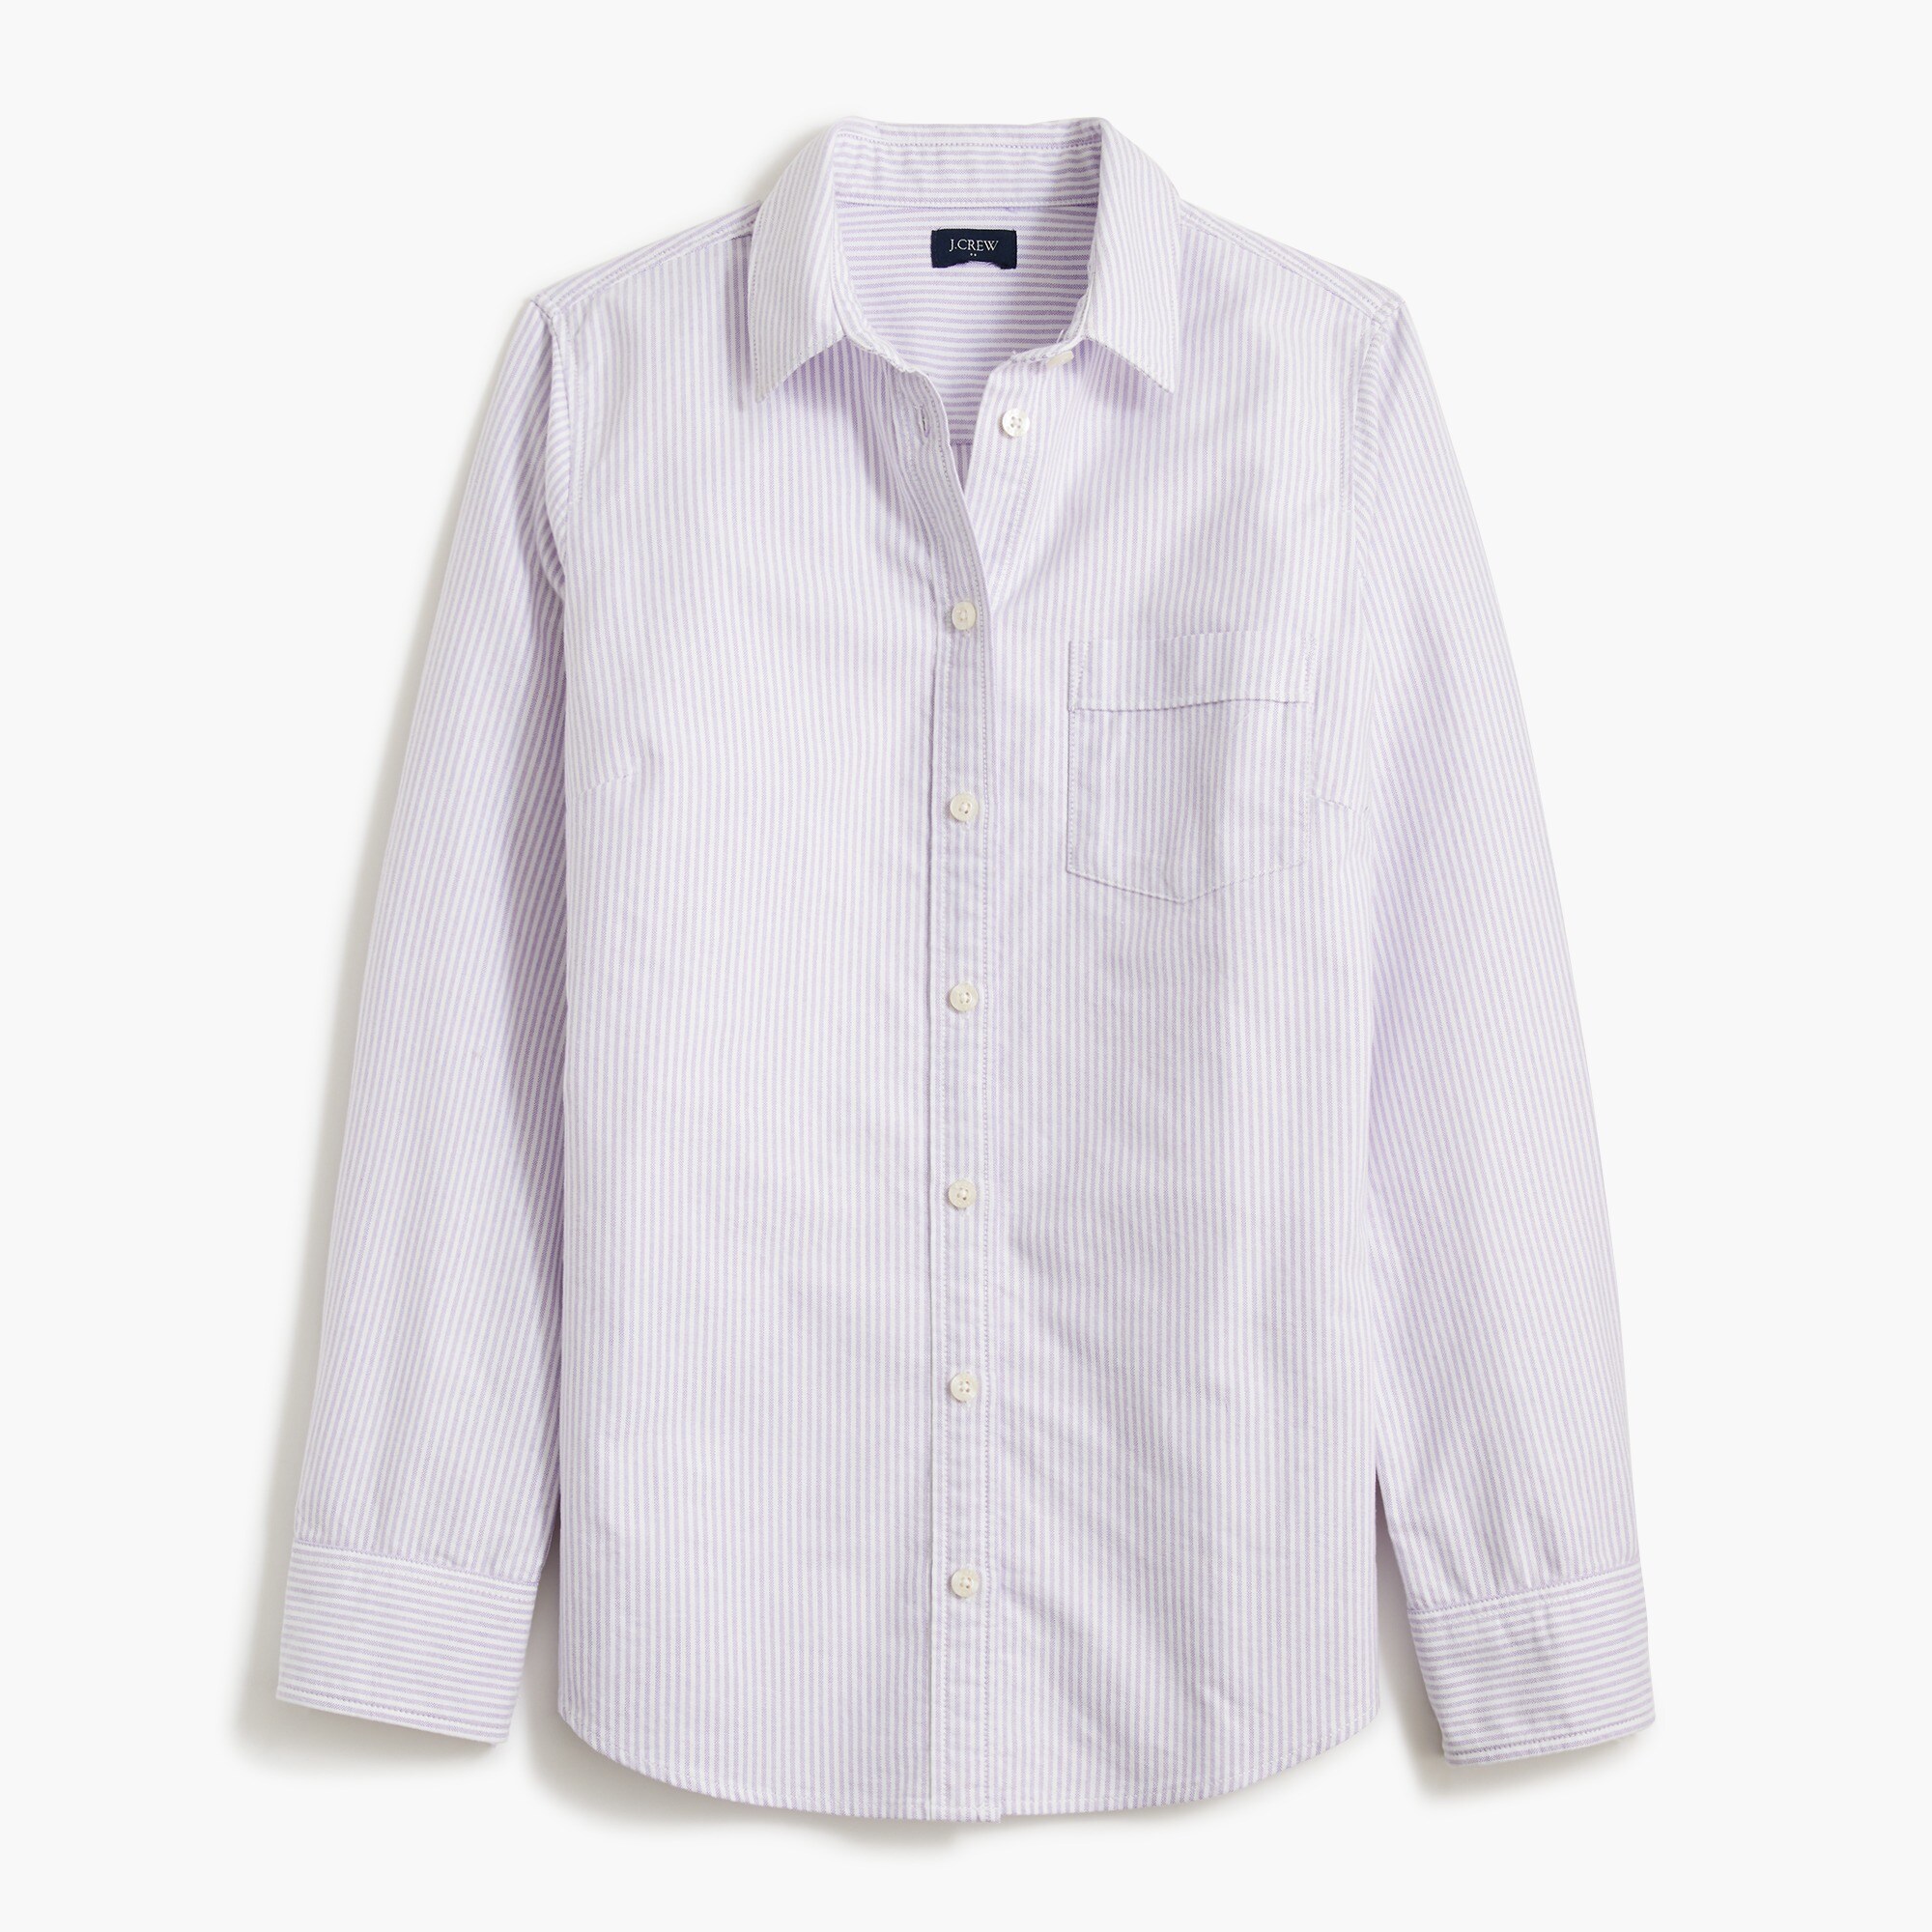  Button-up oxford shirt in signature fit